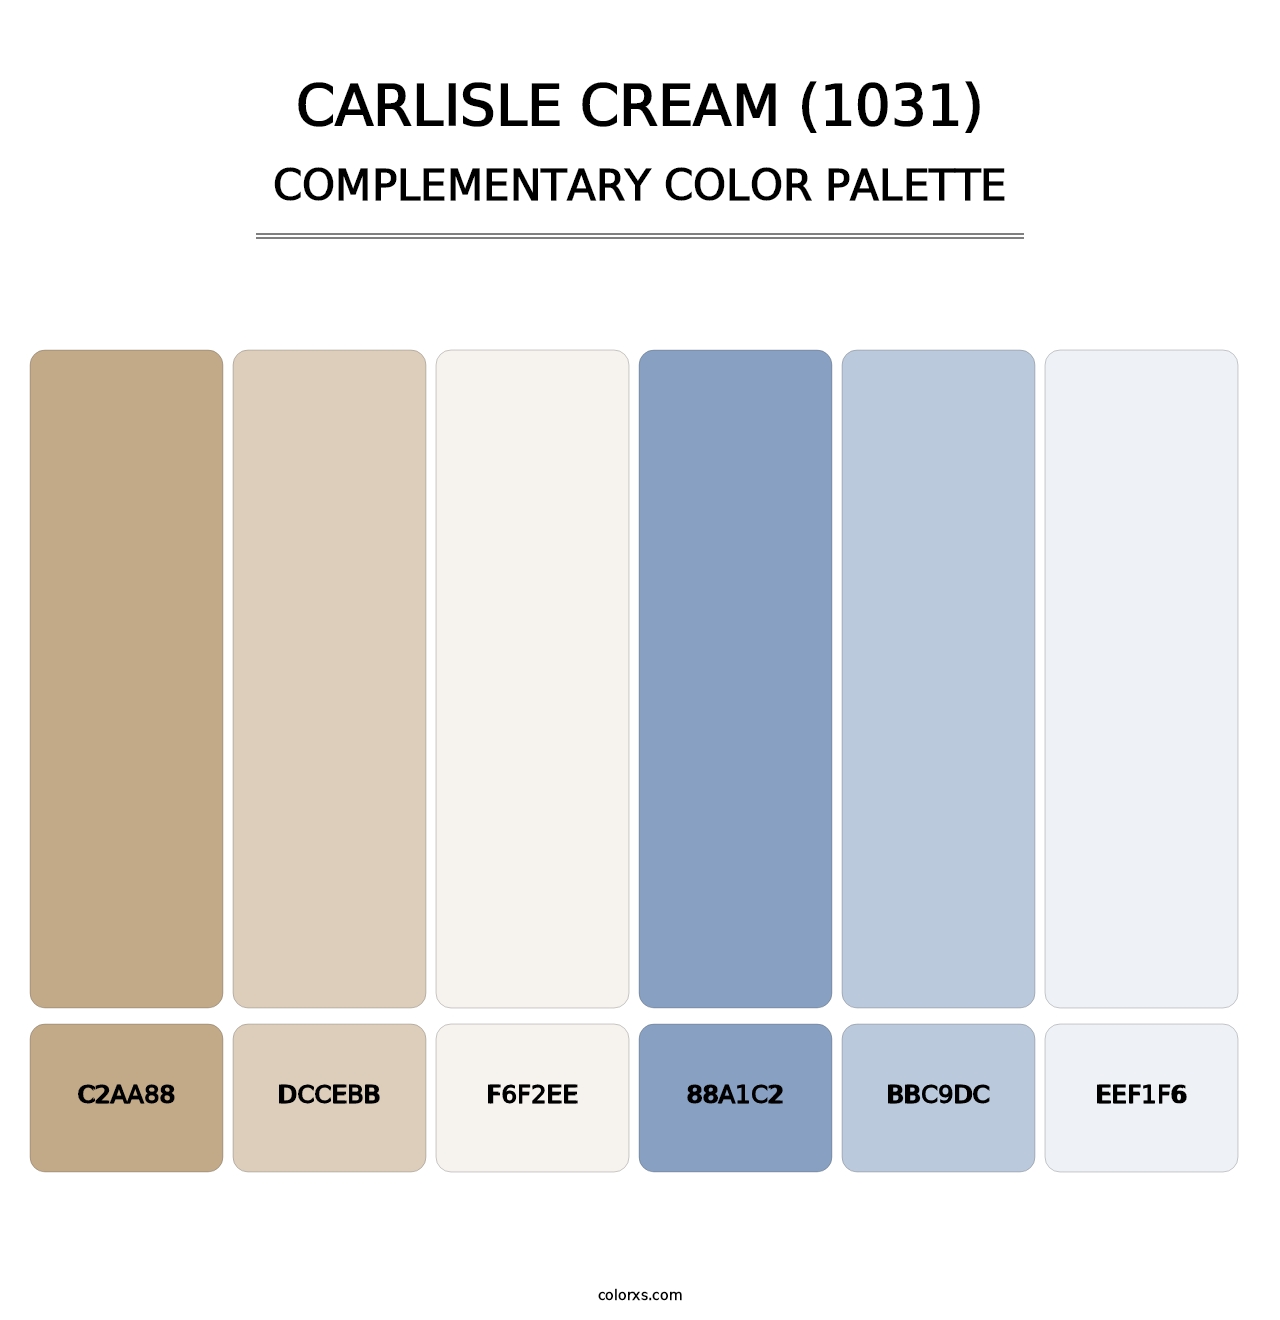 Carlisle Cream (1031) - Complementary Color Palette